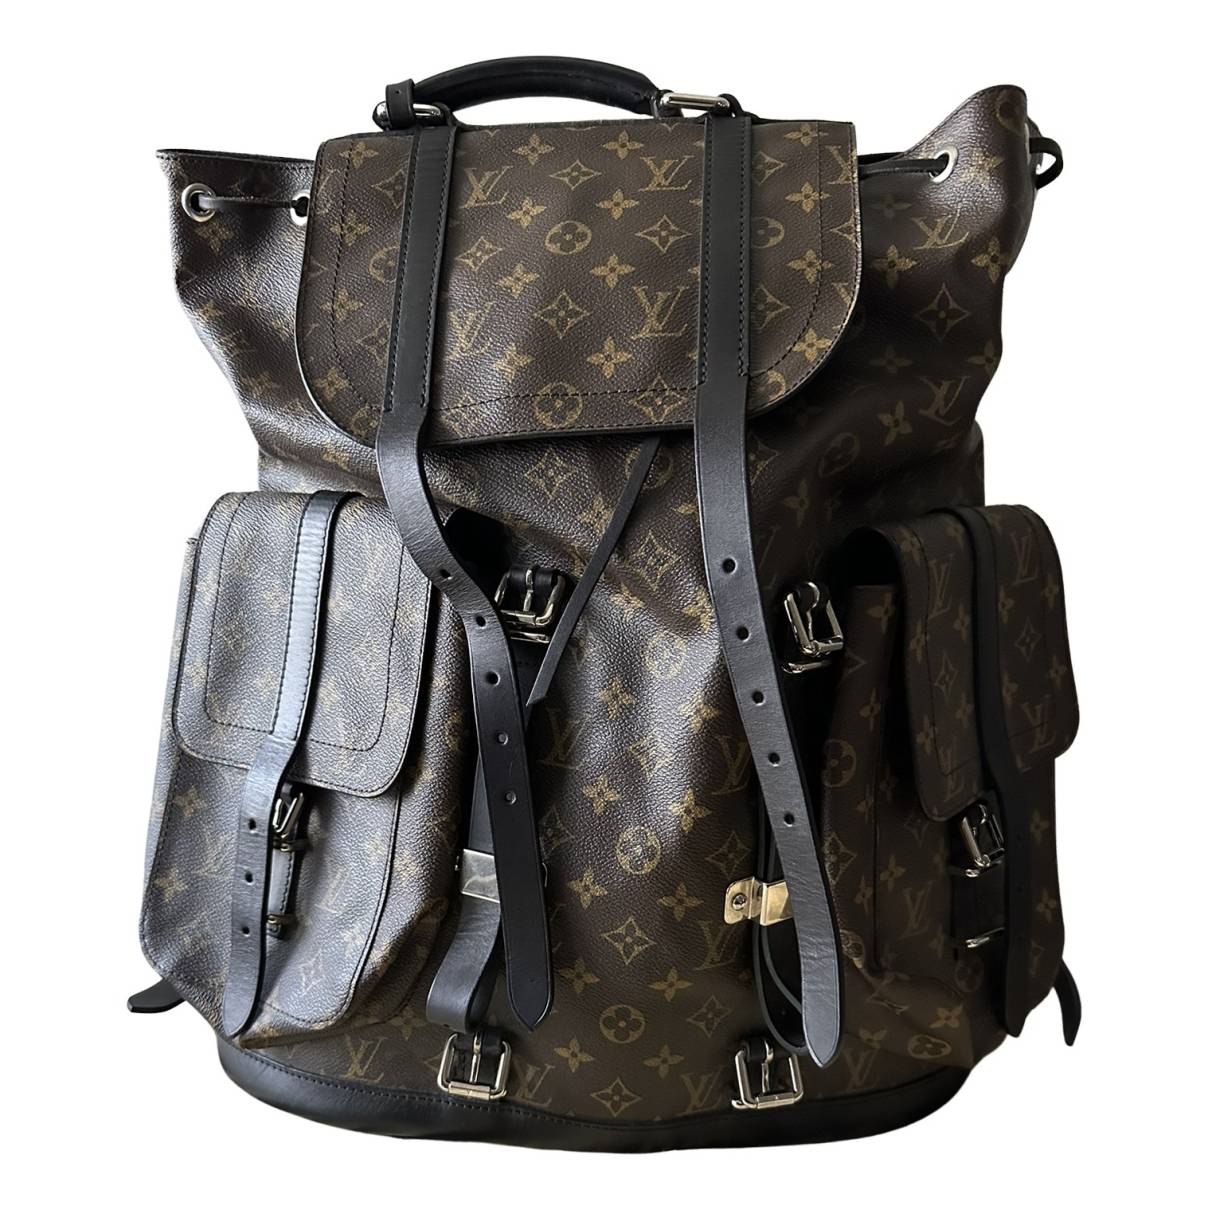 Christopher backpack leather travel bag Louis Vuitton Brown in